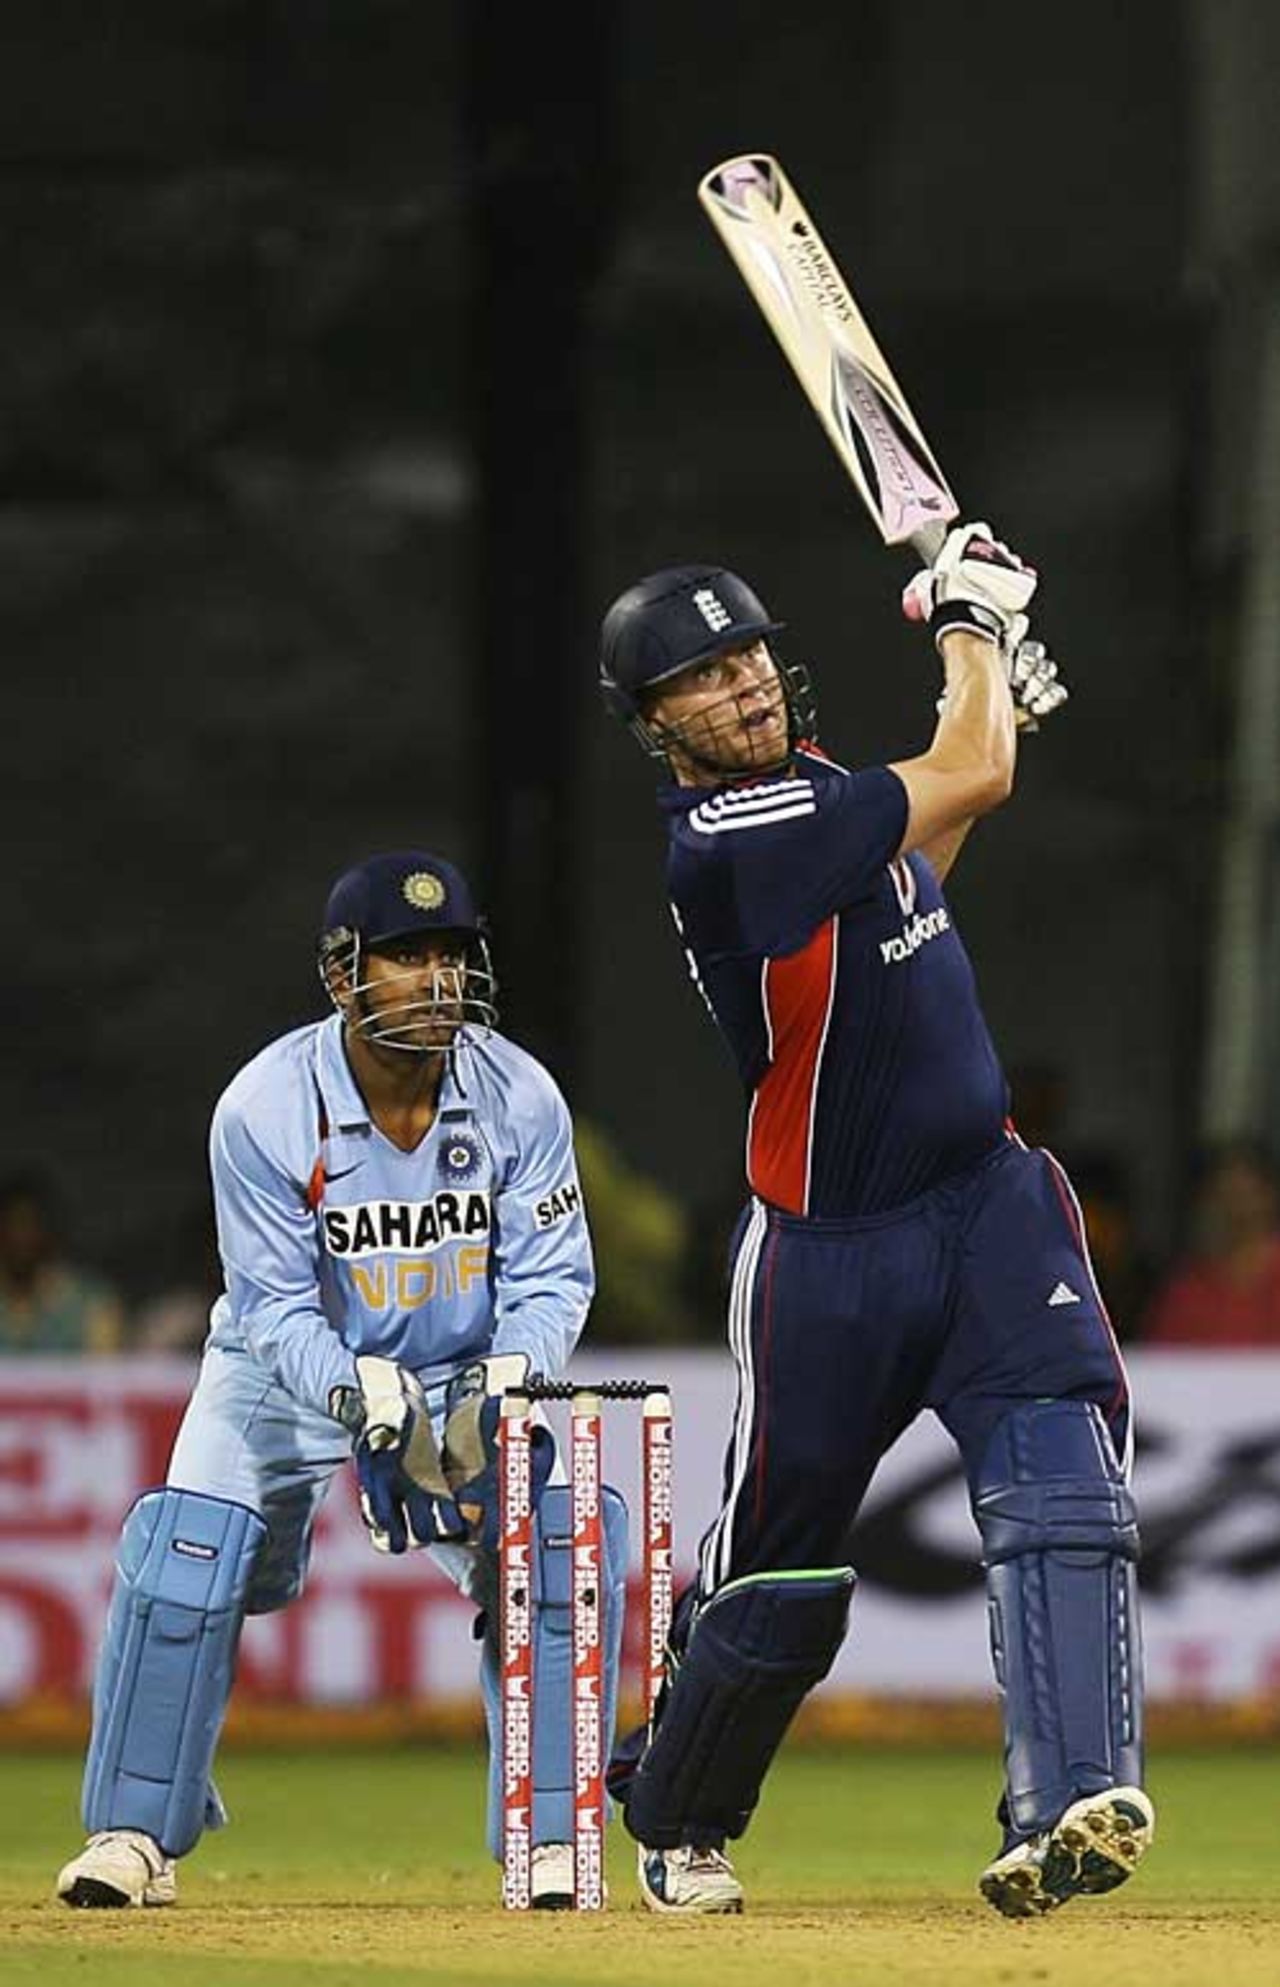 Andrew Flintoff launches down the ground, India v England, 4th ODI, Bangalore, November 23, 2008